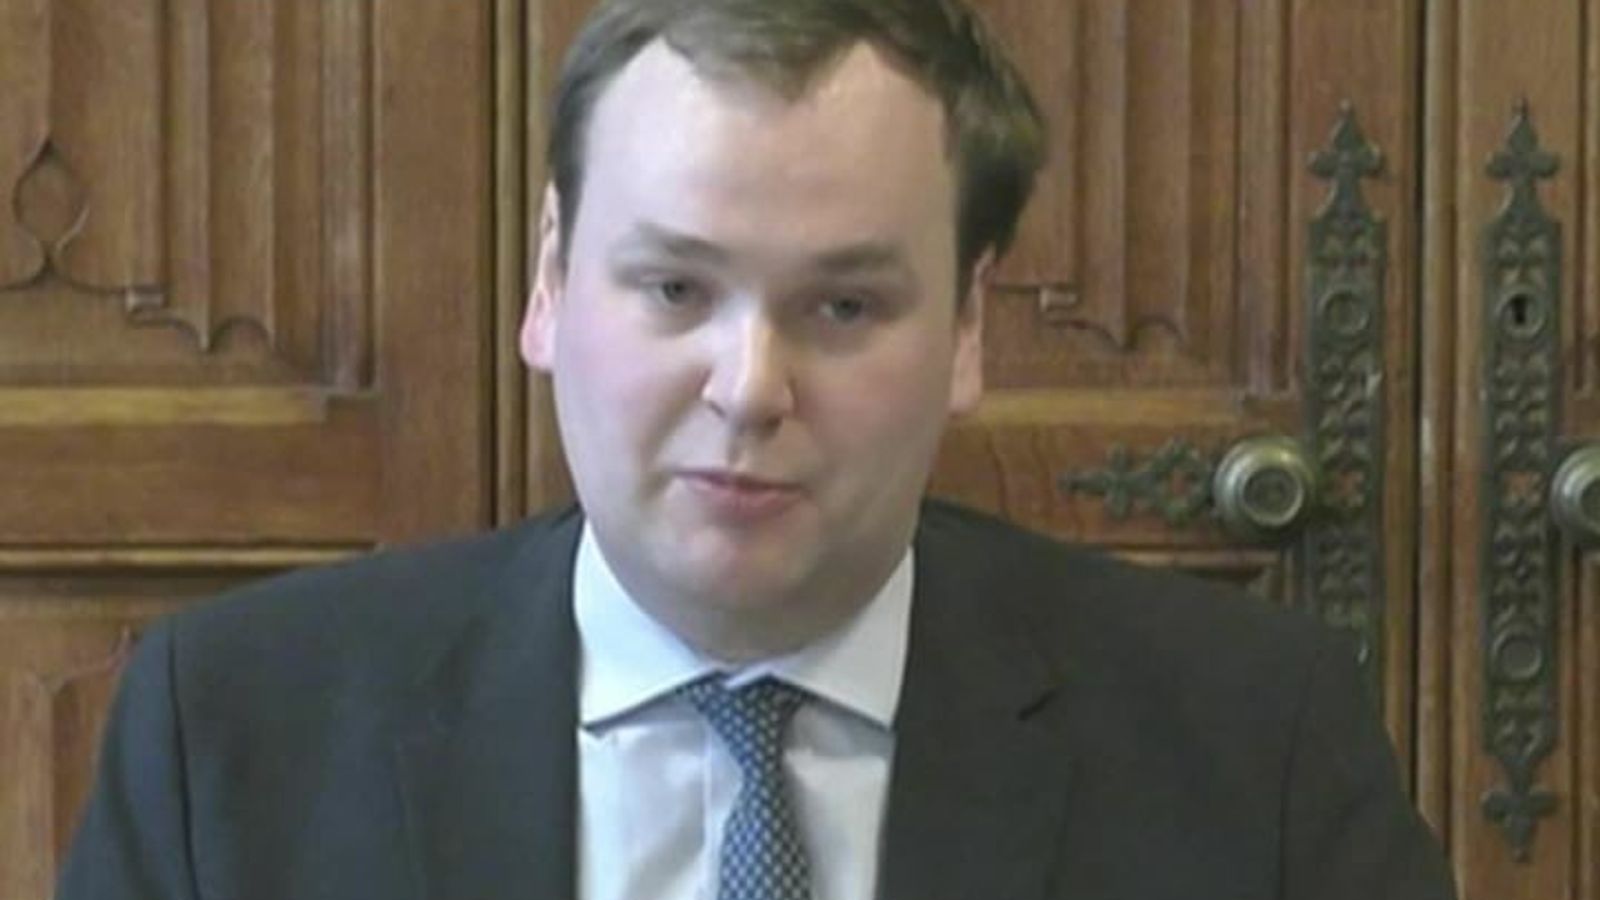 William Wragg: MP at centre of Westminster sexting scandal gives up Tory whip, party says